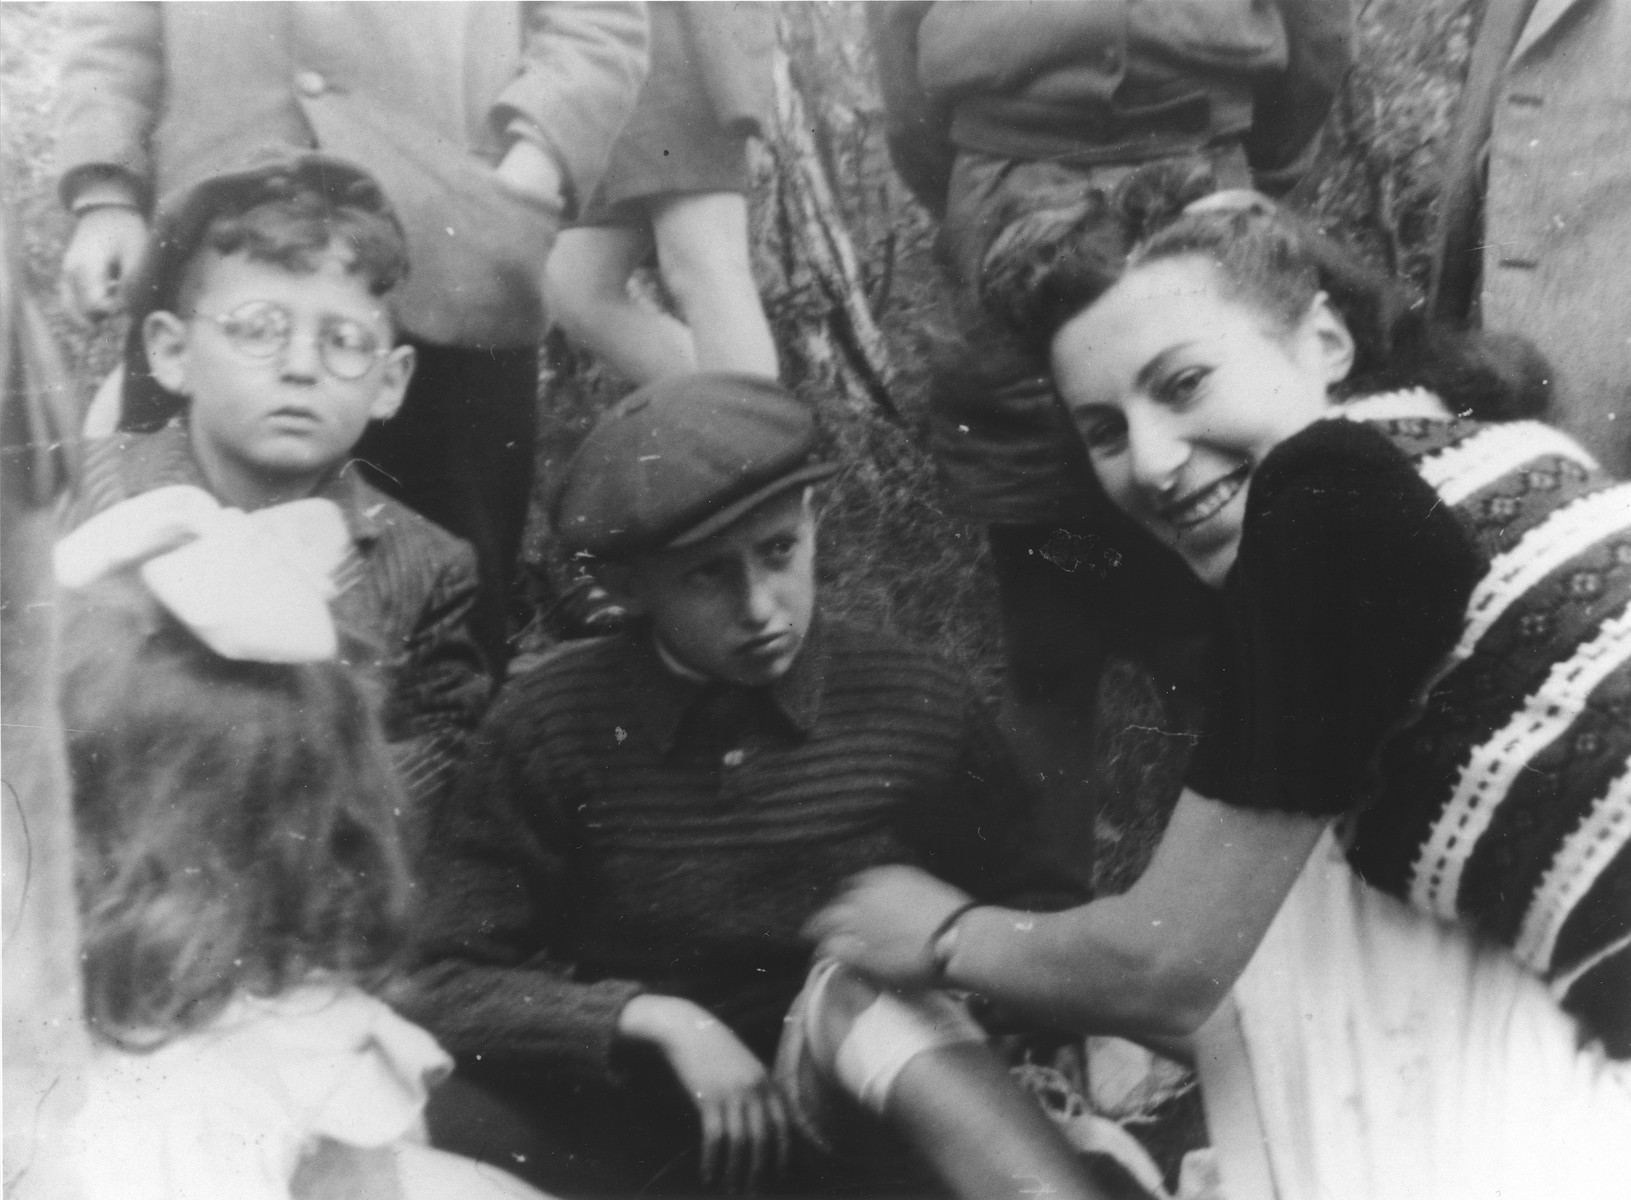 A Red Cross worker bandages a child's leg in the Ulm displaced persons camp.

Srulek Rajs is pictured on the far left.